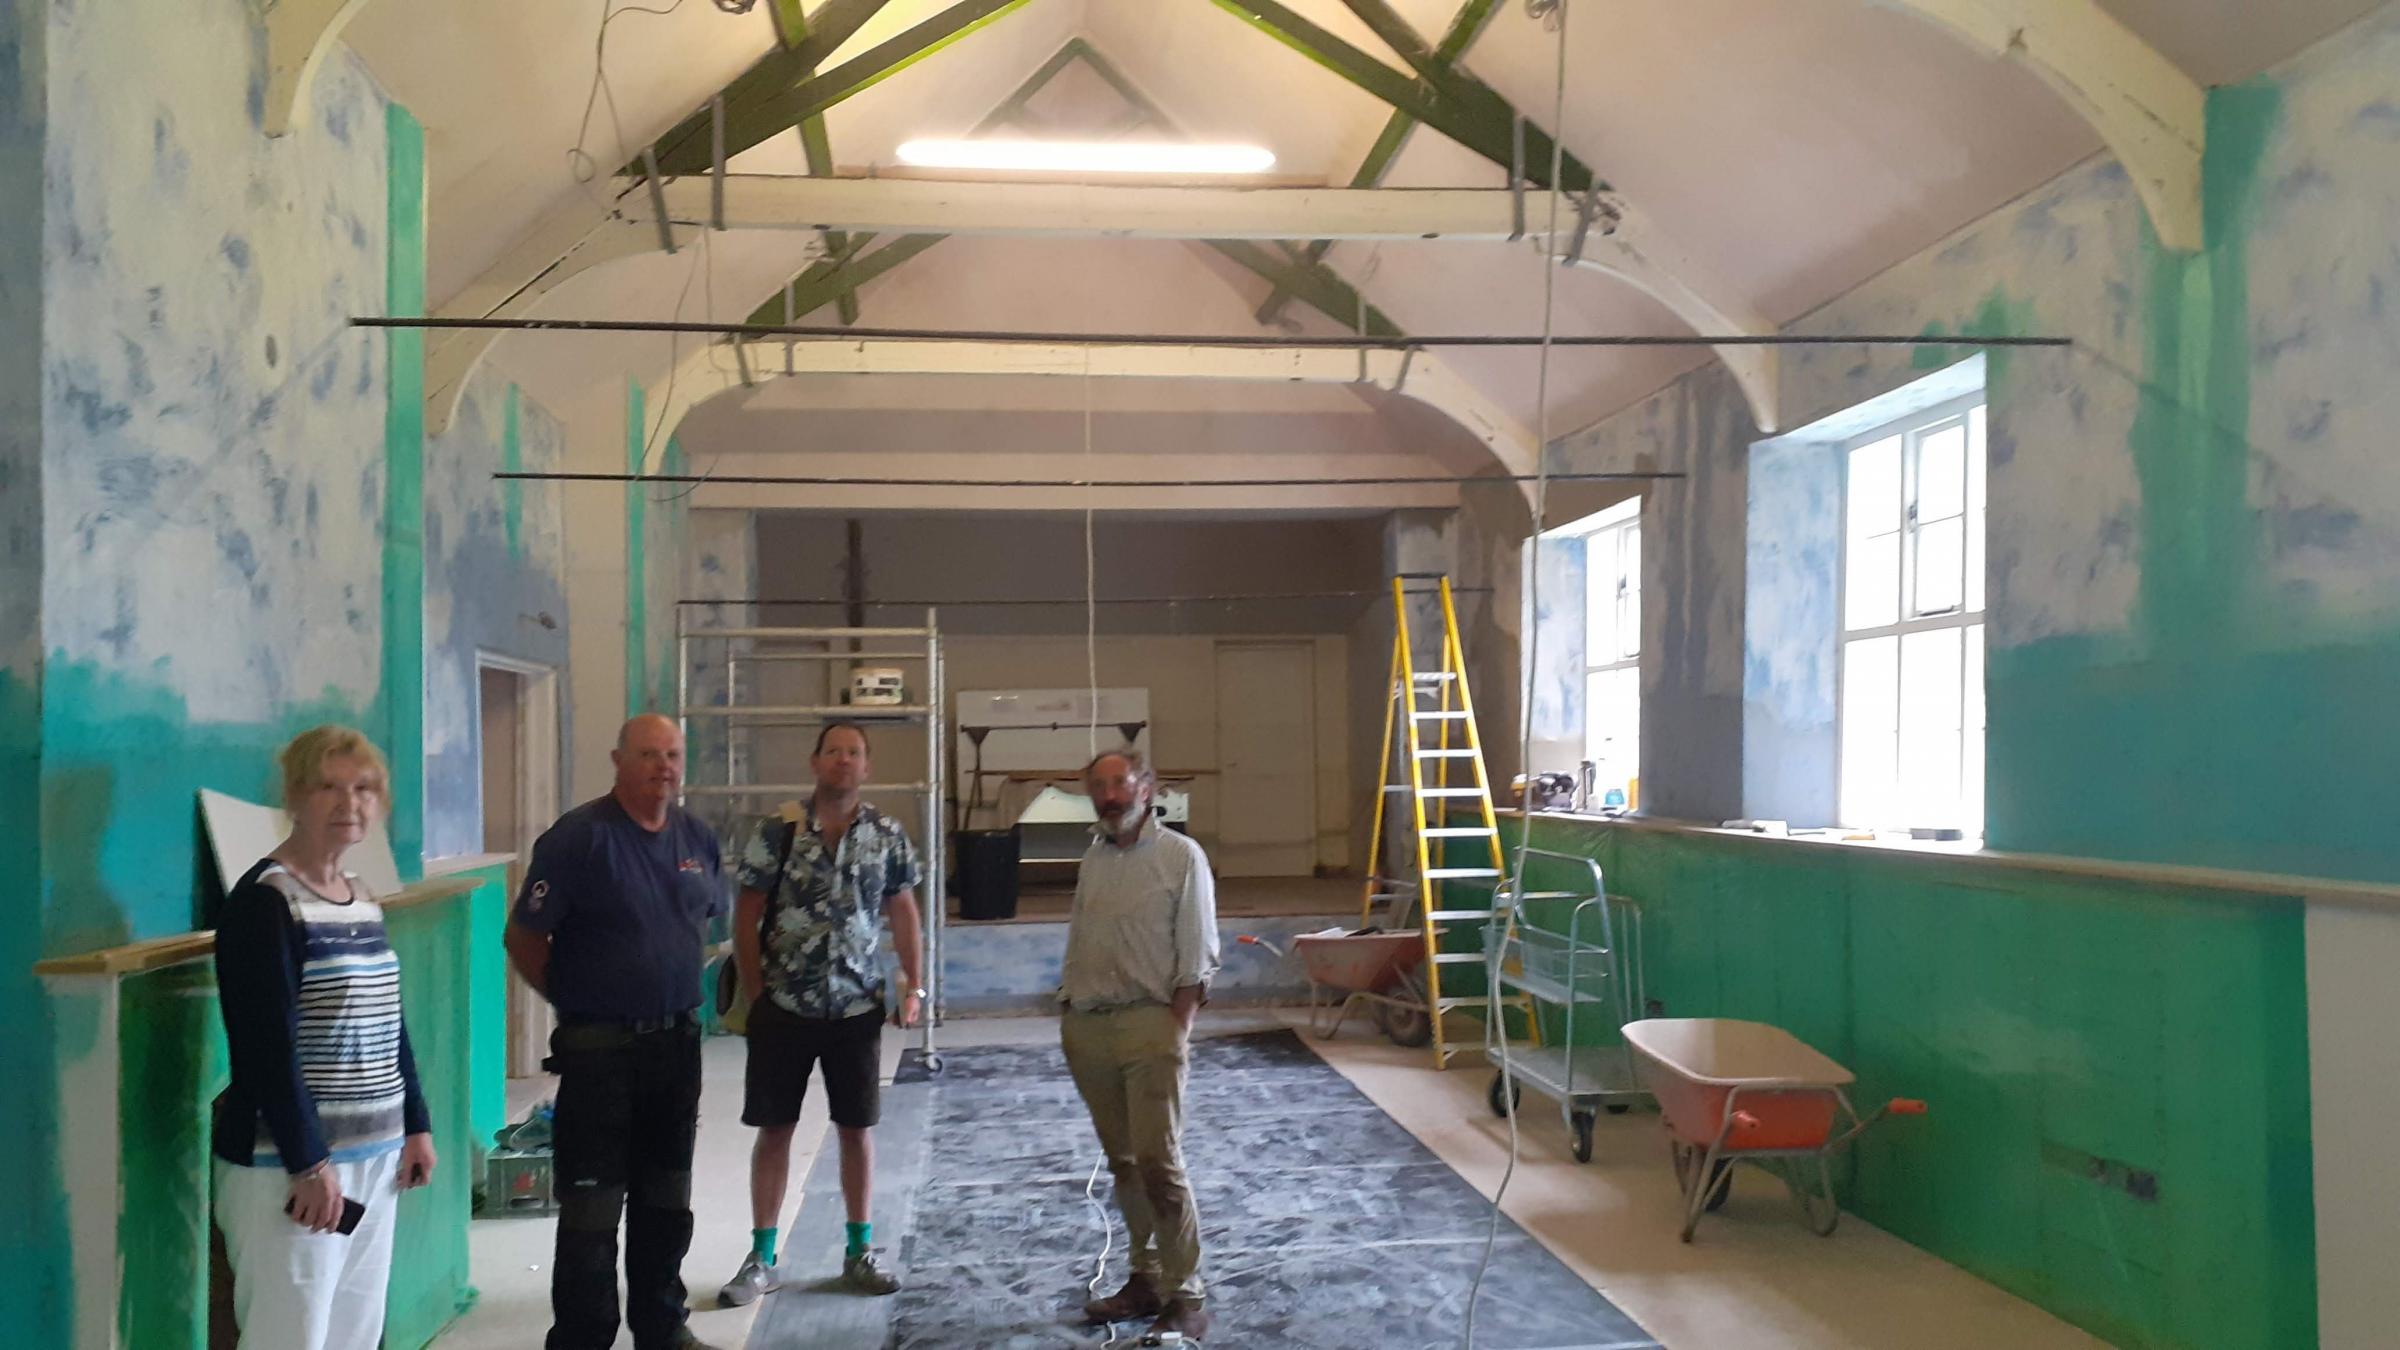 Builder Geoff Powell and architect Tom Mcewan with Margaret Lambert and Jeremy Helme of Llanwarne village hall during renovation work.